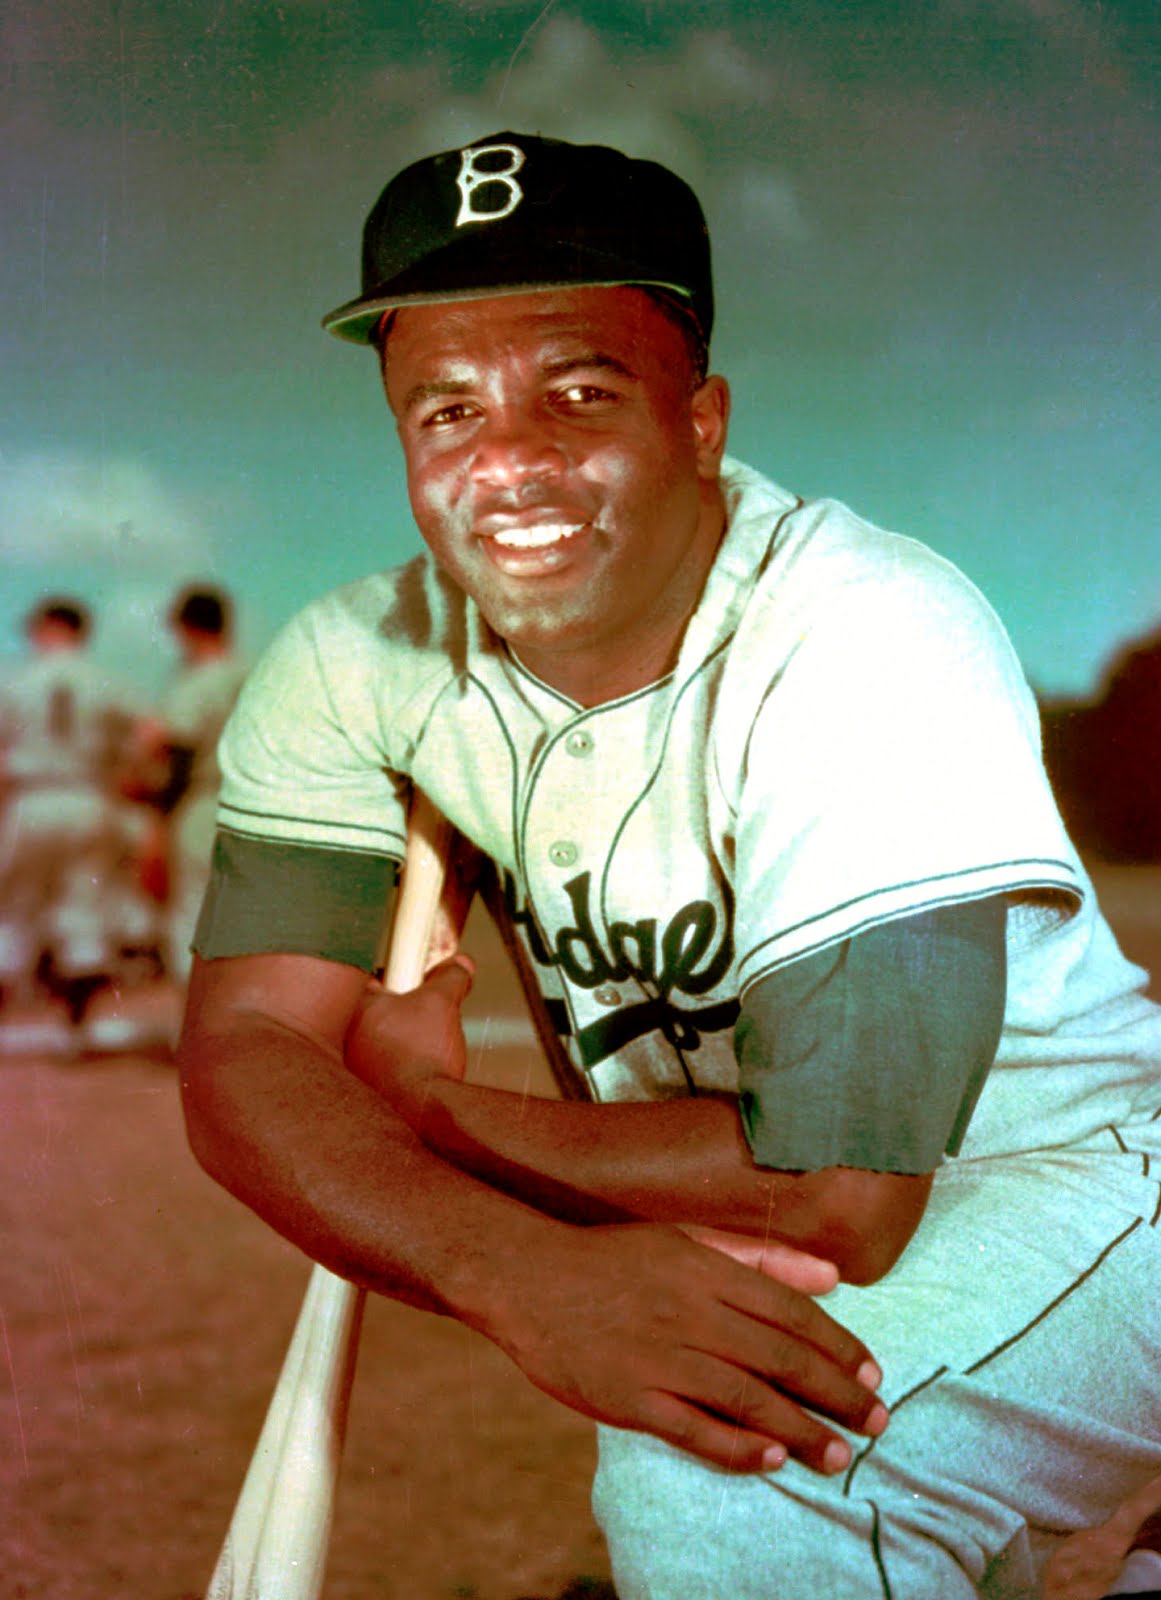 JACKIE ROBINSON (1919-1972) HALL-OF-FAME BASEBALL PLAYER-CIVIL RIGHTS ADVOCATE-BUSINESSMAN